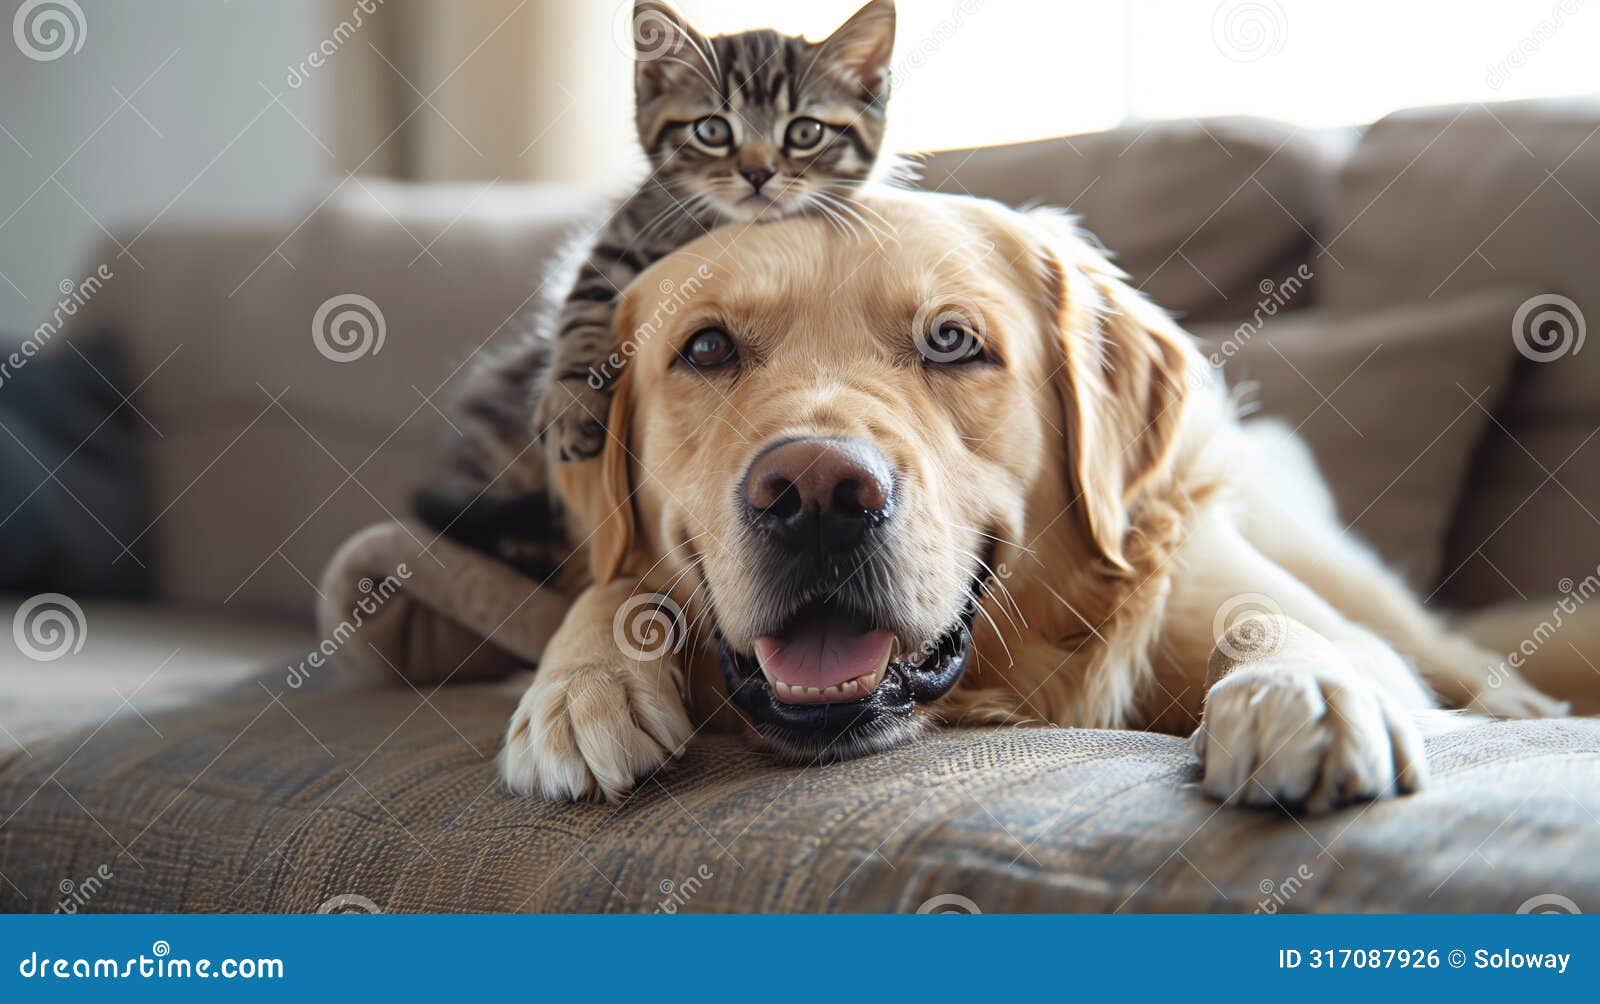 cute home pets scene and dog and cat friendship concept. small kitty lying on the big furry labrador canine and together looking